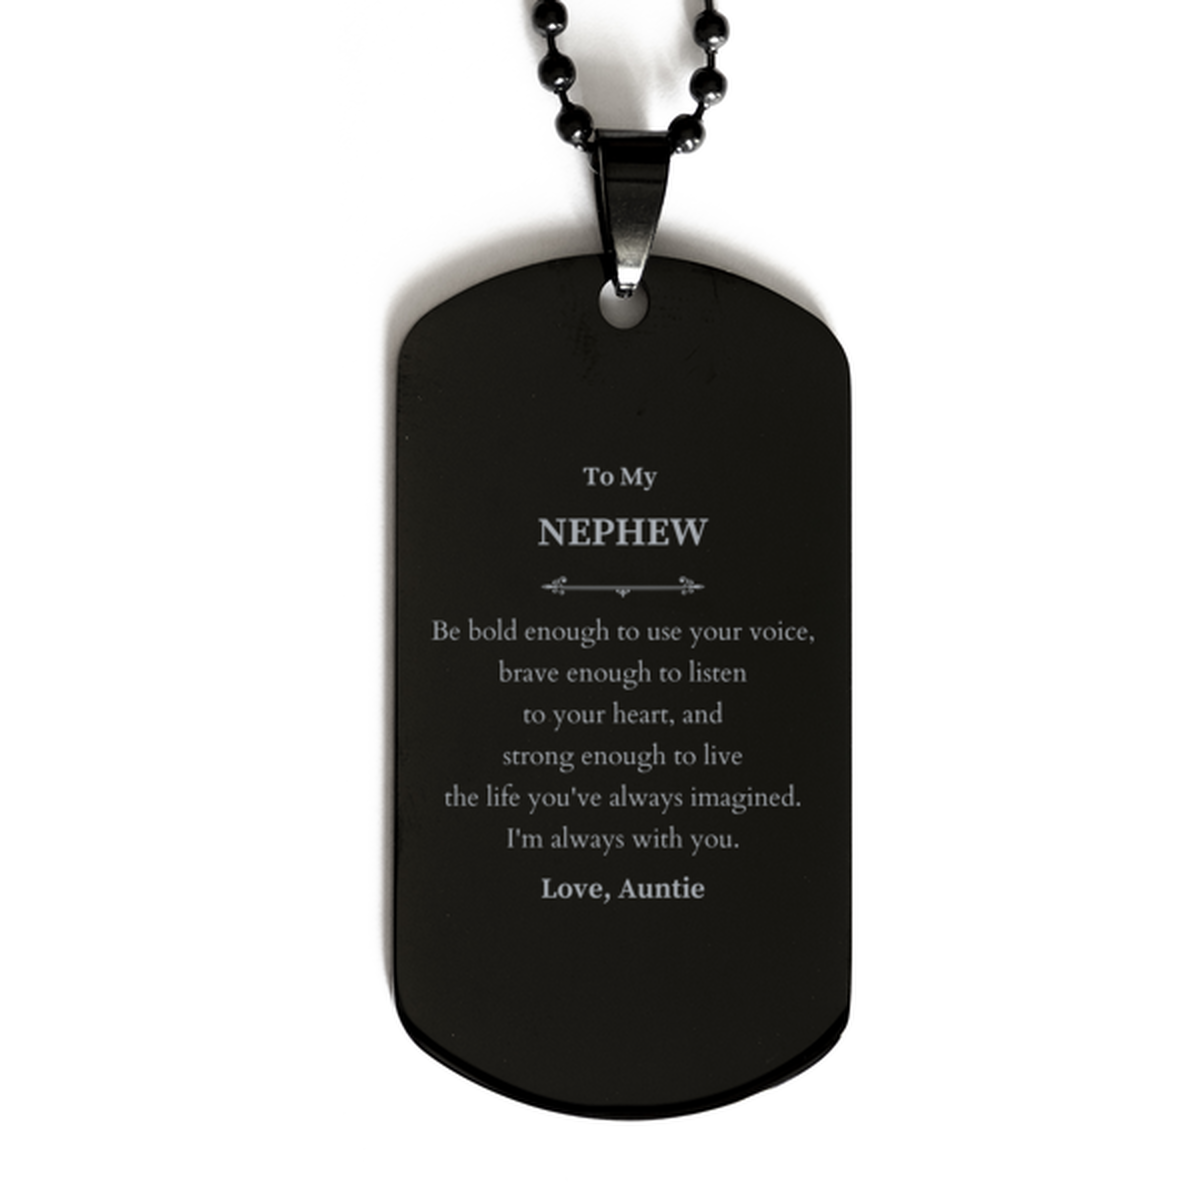 Keepsake Nephew Black Dog Tag Gift Idea Graduation Christmas Birthday Nephew from Auntie, Nephew Be bold enough to use your voice, brave enough to listen to your heart. Love, Auntie